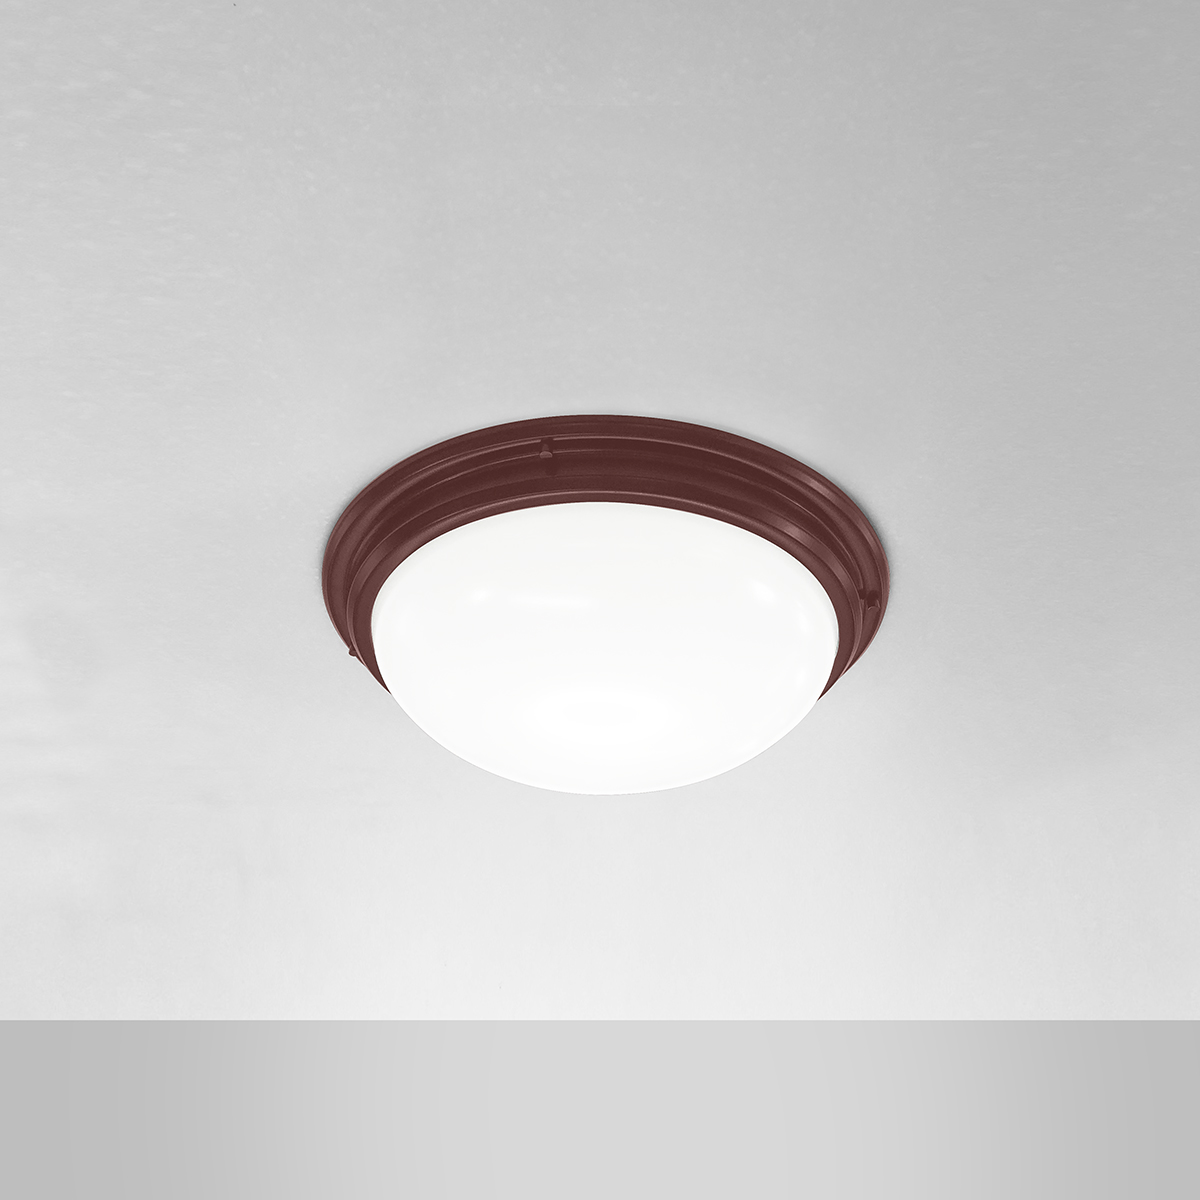 A ceiling-mounted bowl fixture